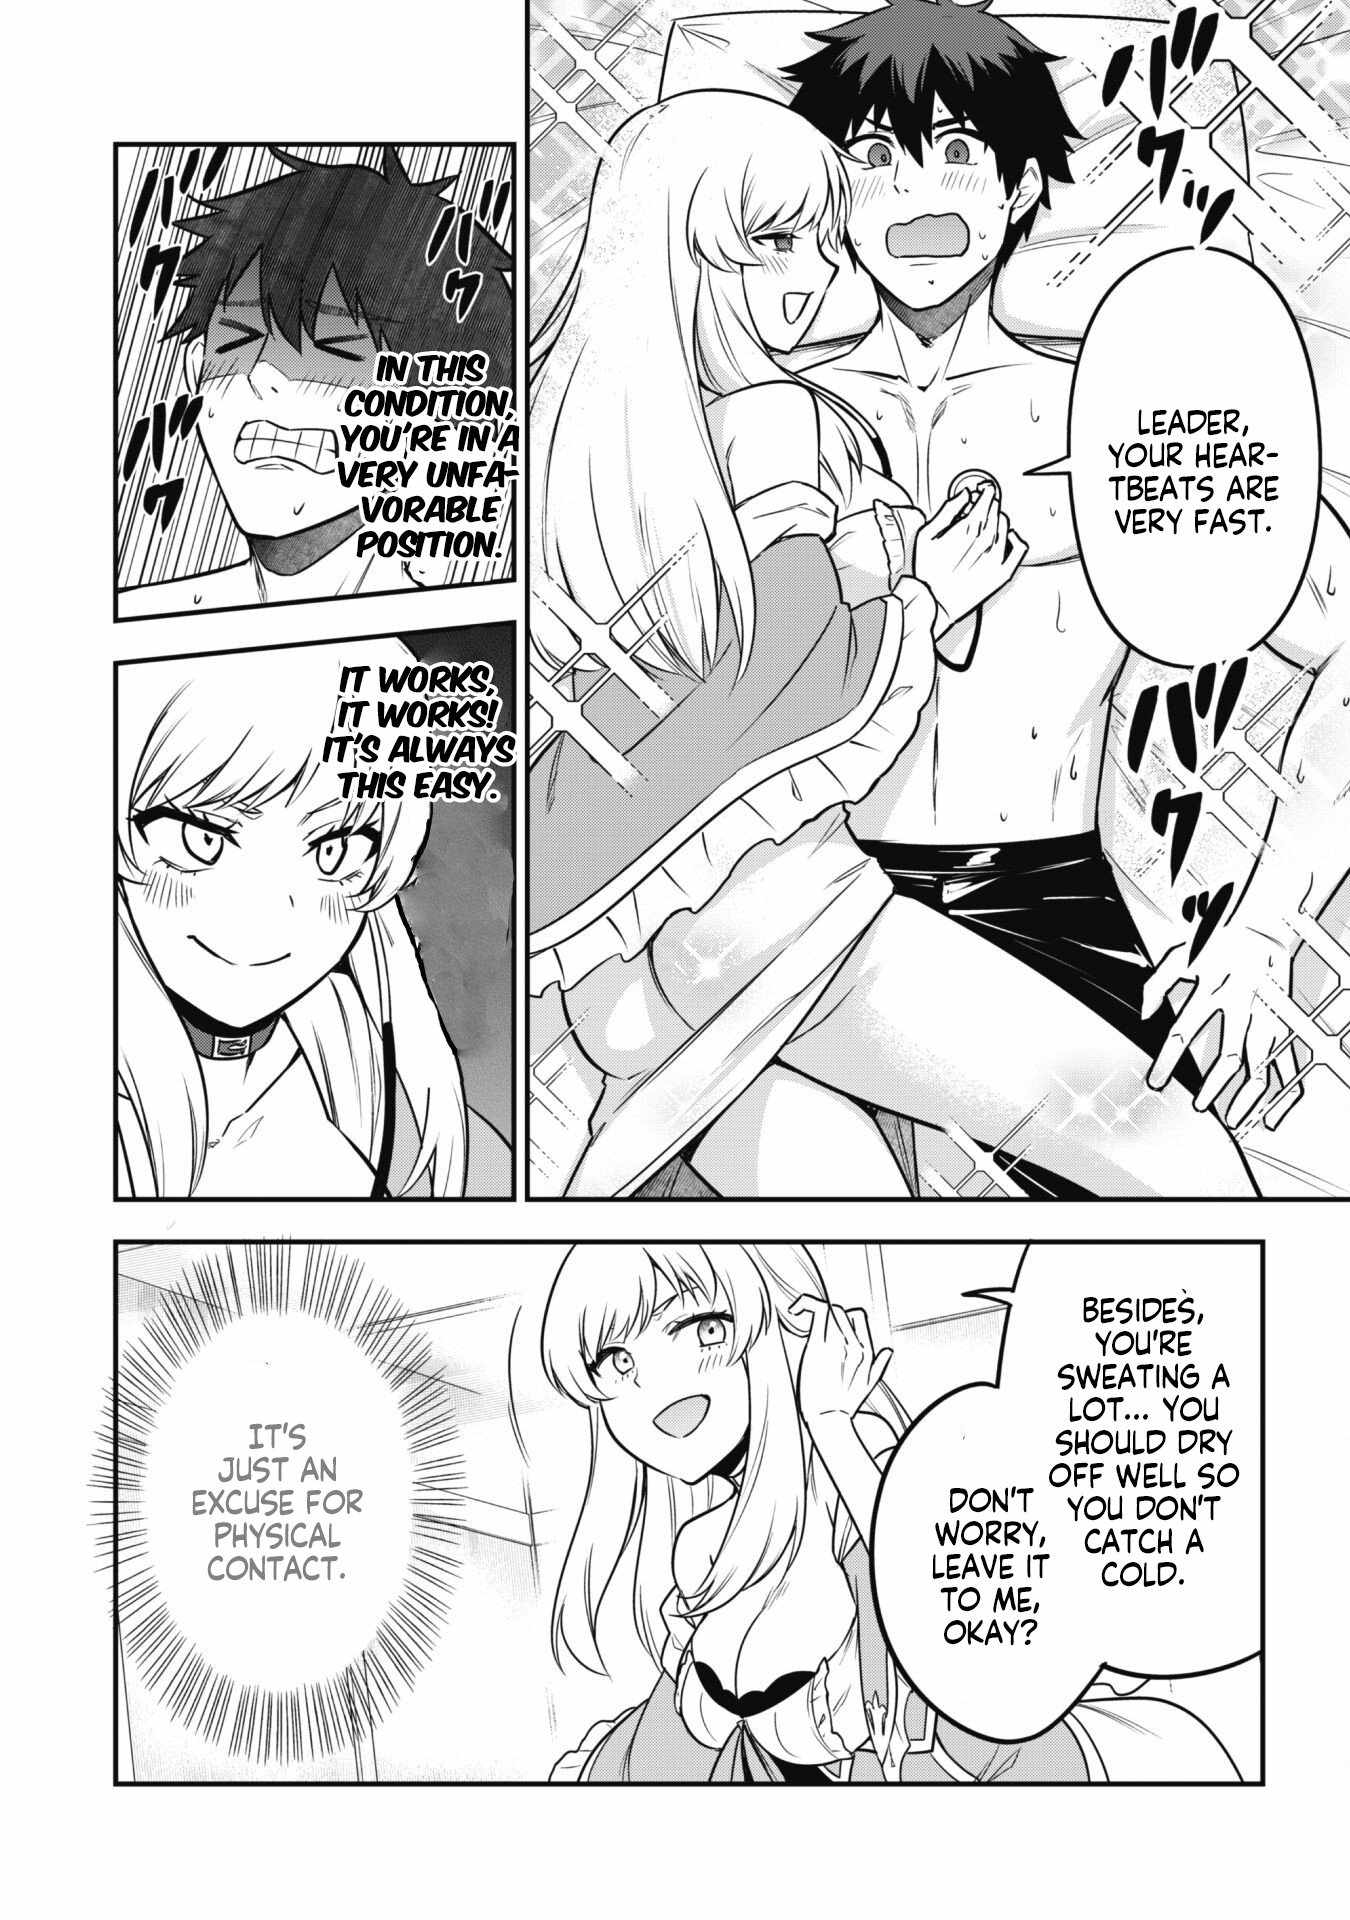 The White Mage Who Joined My Party Is a Circle Crusher, So My Isekai Life Is at Risk of Collapsing Once Again Chapter 8-2-eng-li - Page 4